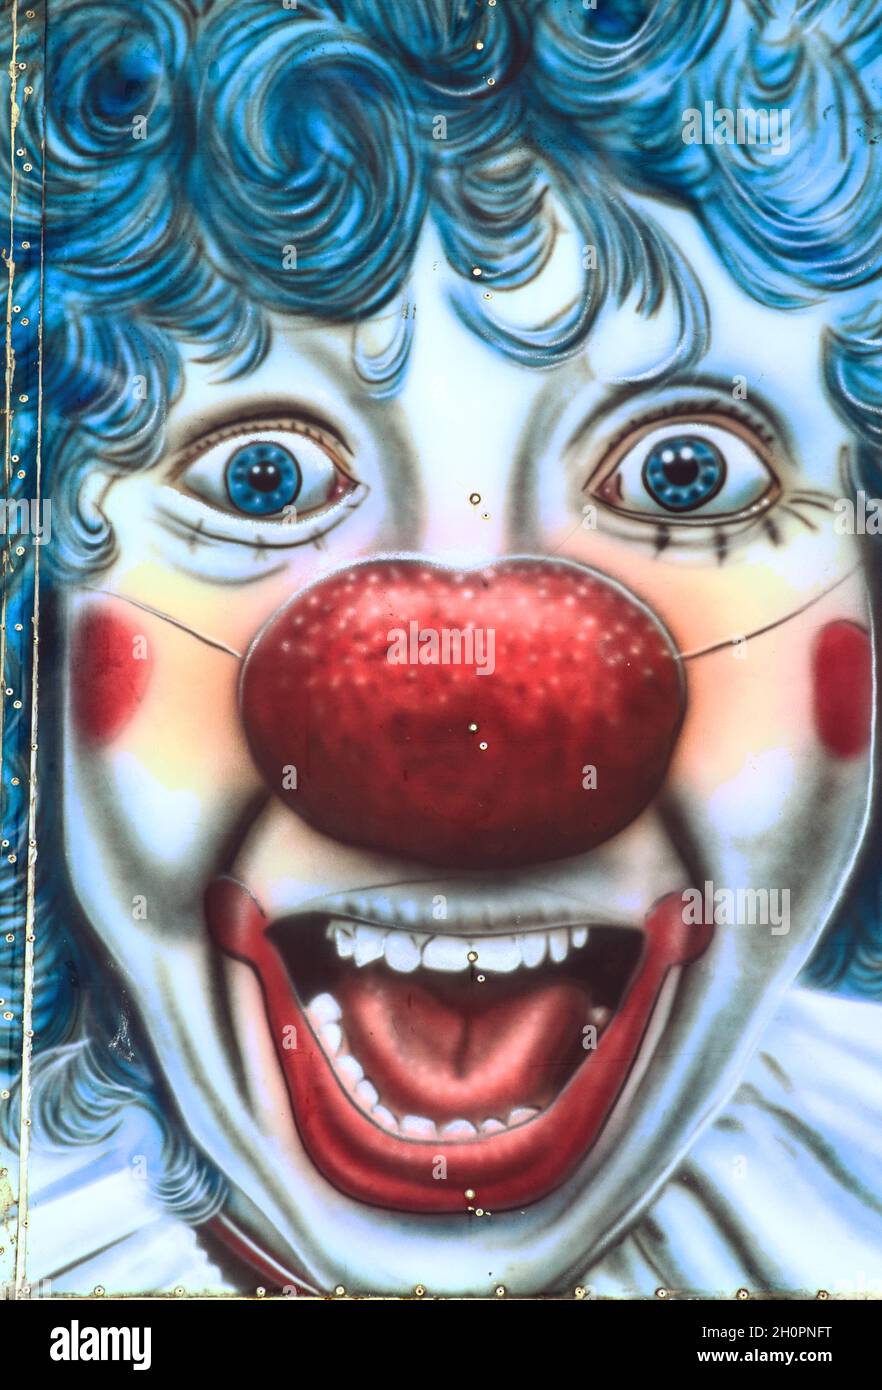 Airbrushed Painting of A Laughing Clown with Blue Hair auf Einer Messe in Großbritannien Stockfoto